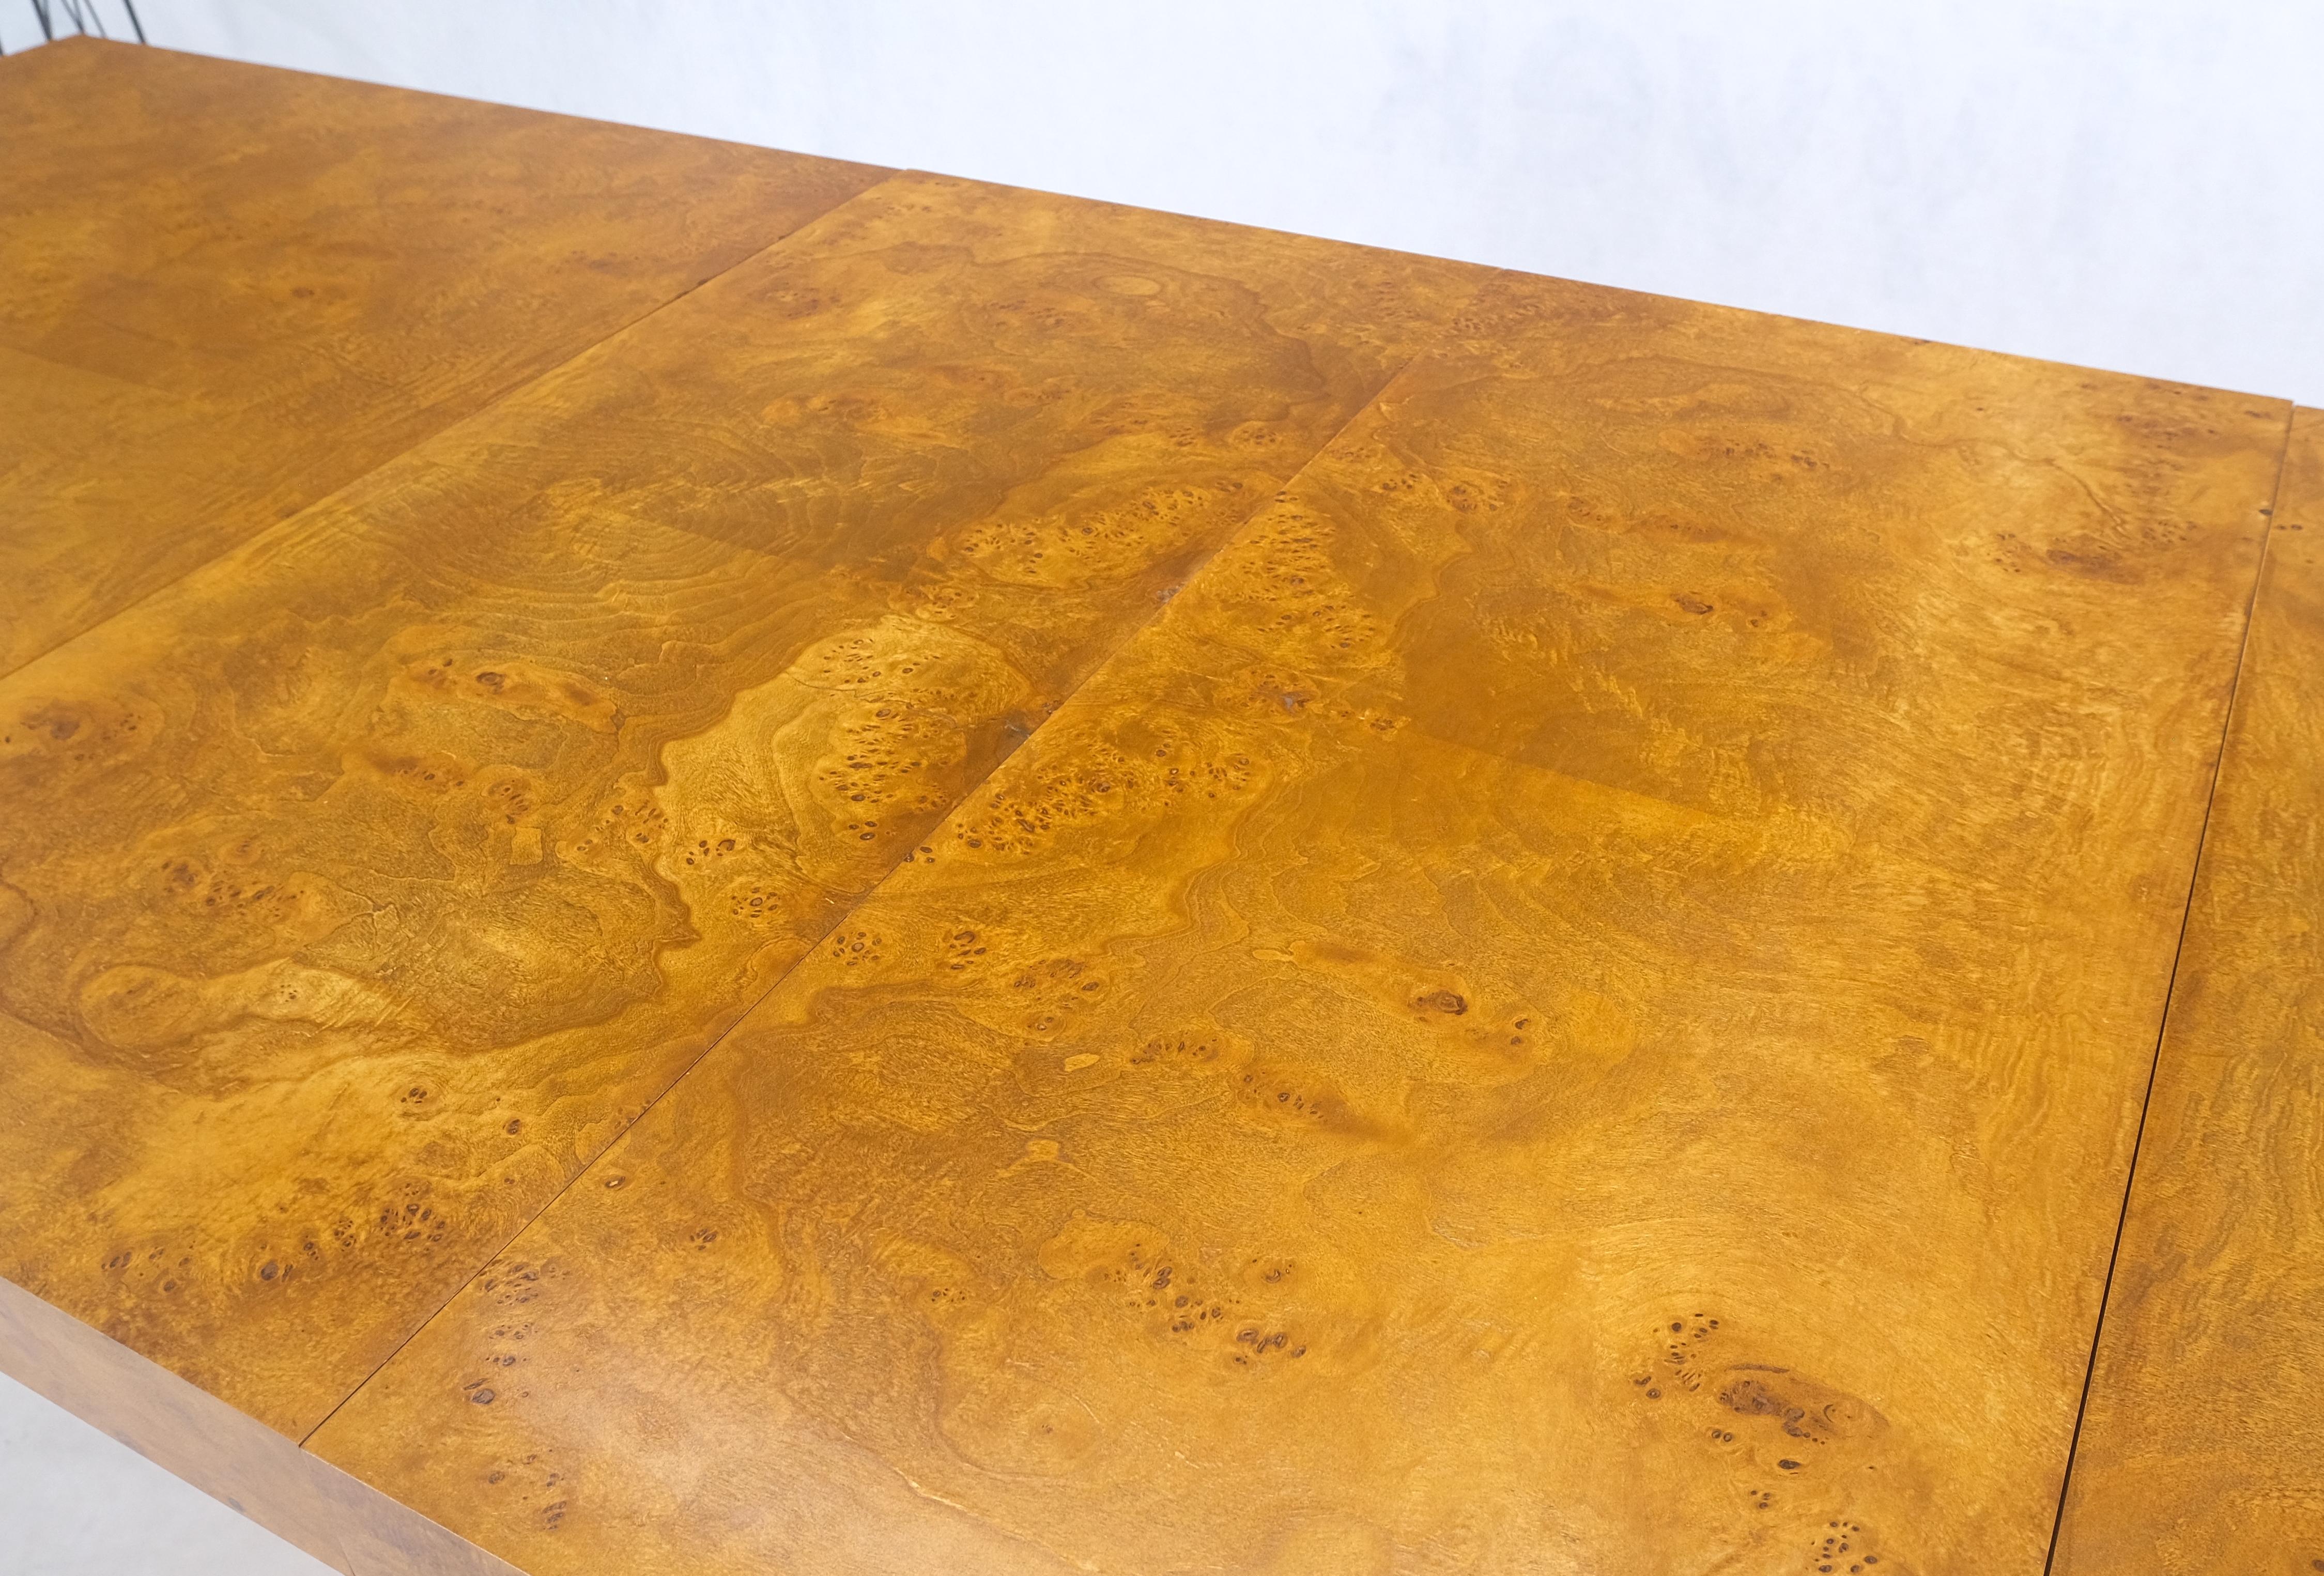 Milo Baughman Honey Amber Burl Wood Single Pedestal Dining Table Two Leaves MINT
Two leaves are 18